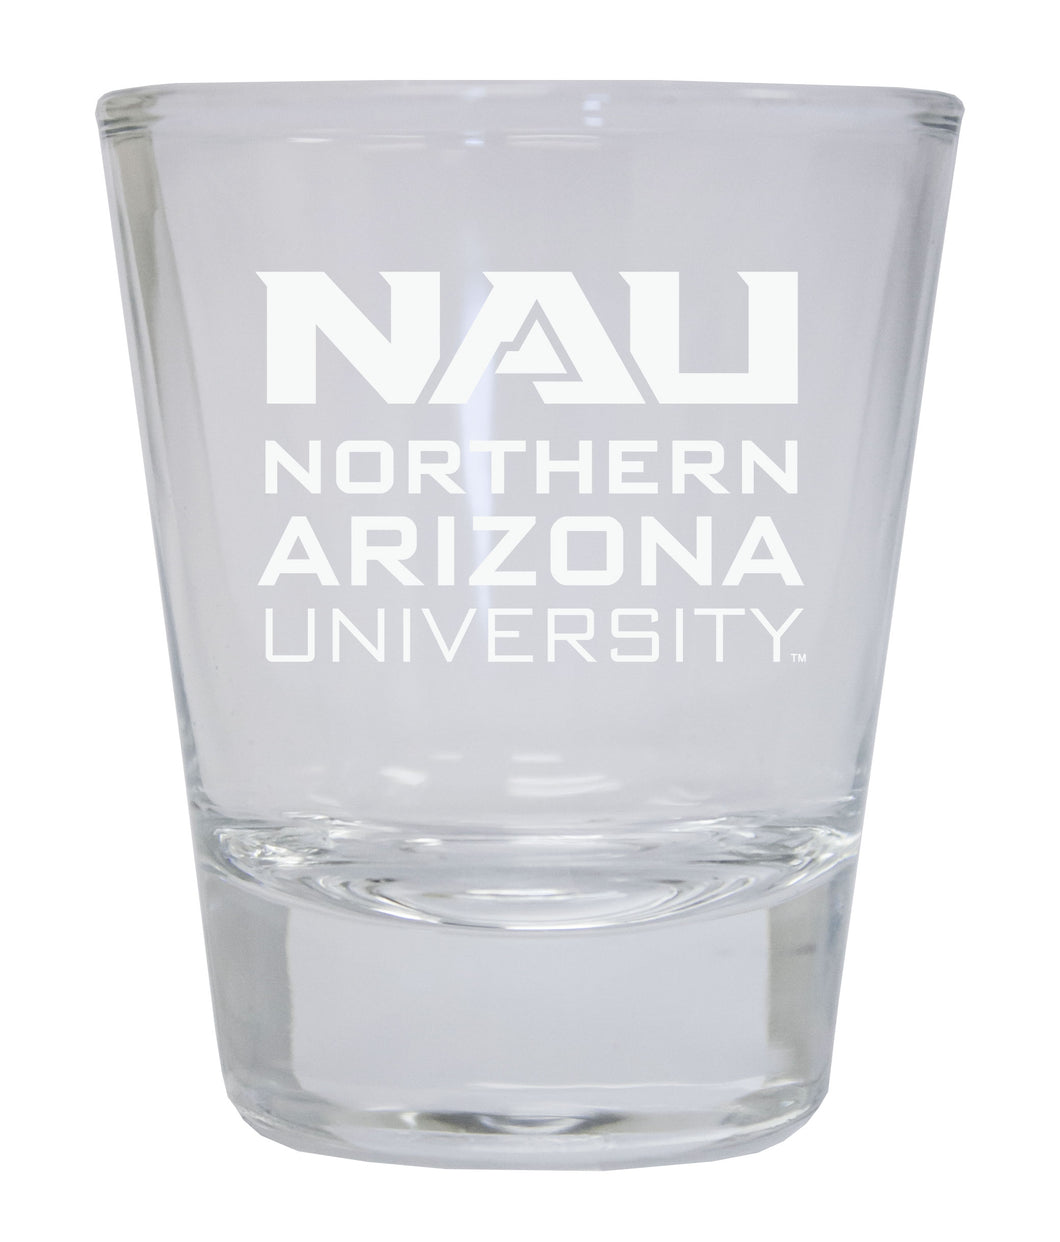 Northern Arizona UnIversity Etched Round Shot Glass Officially Licensed Collegiate Product